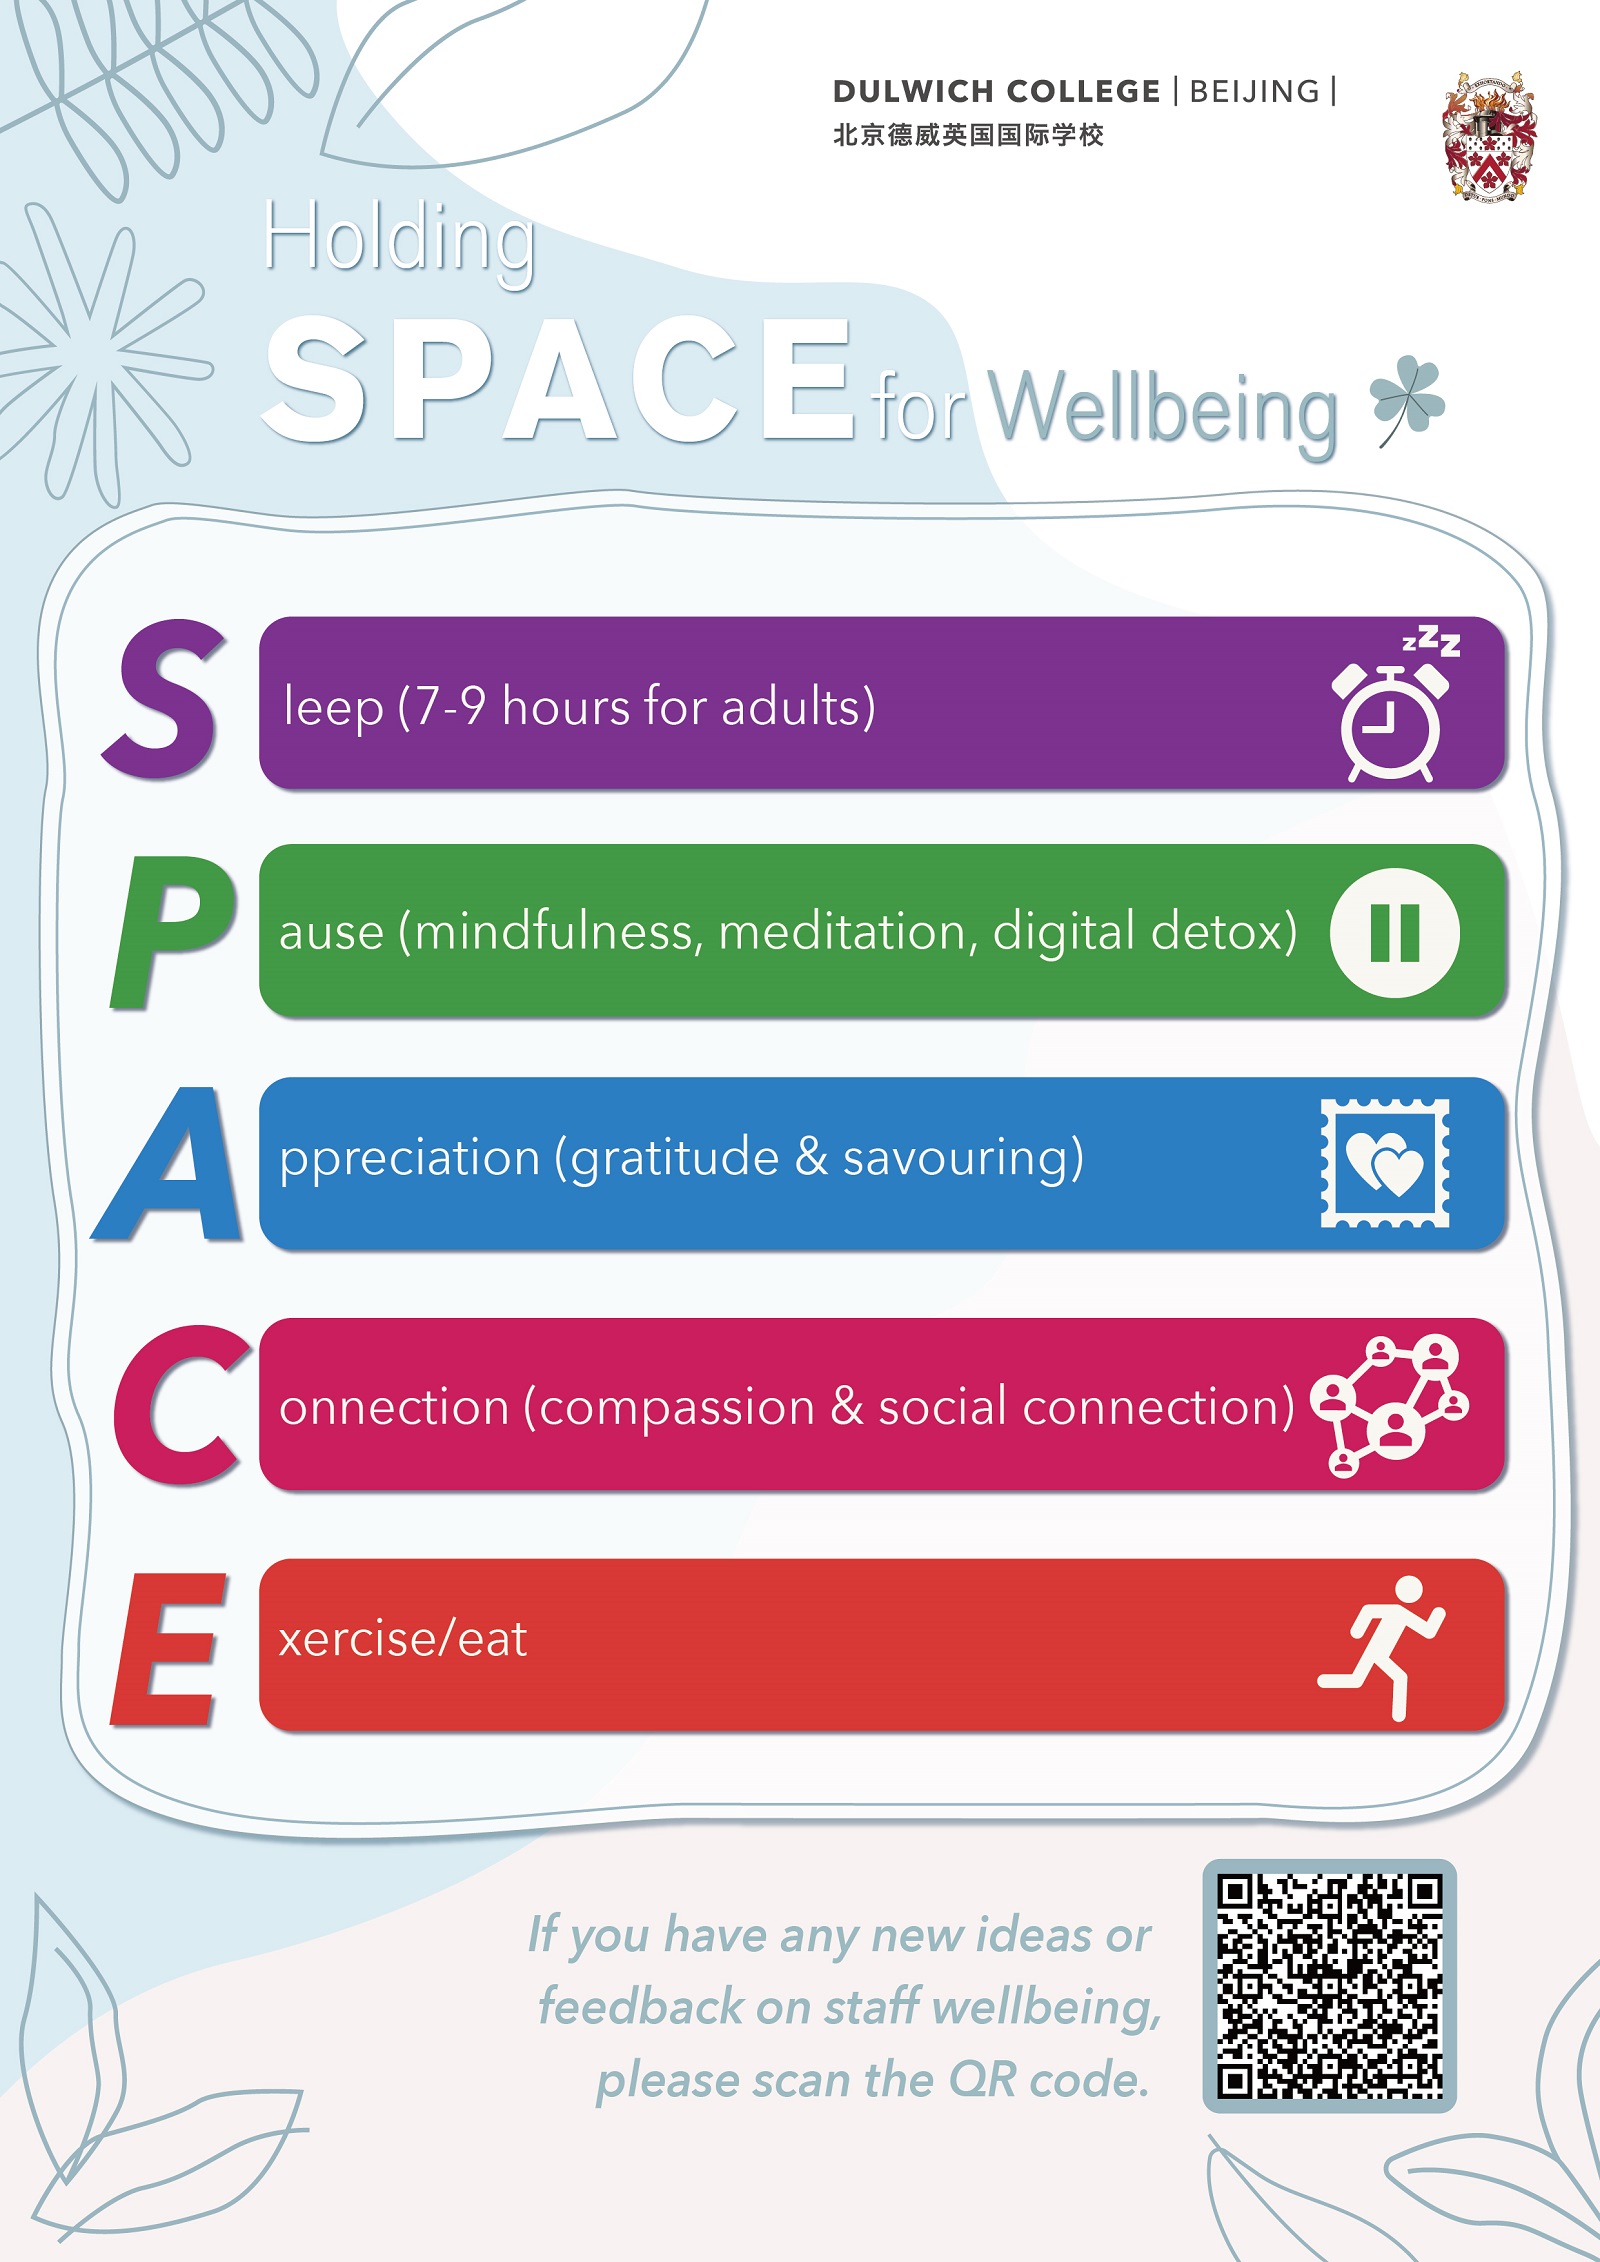 wellbeing framework for our community: SPACE